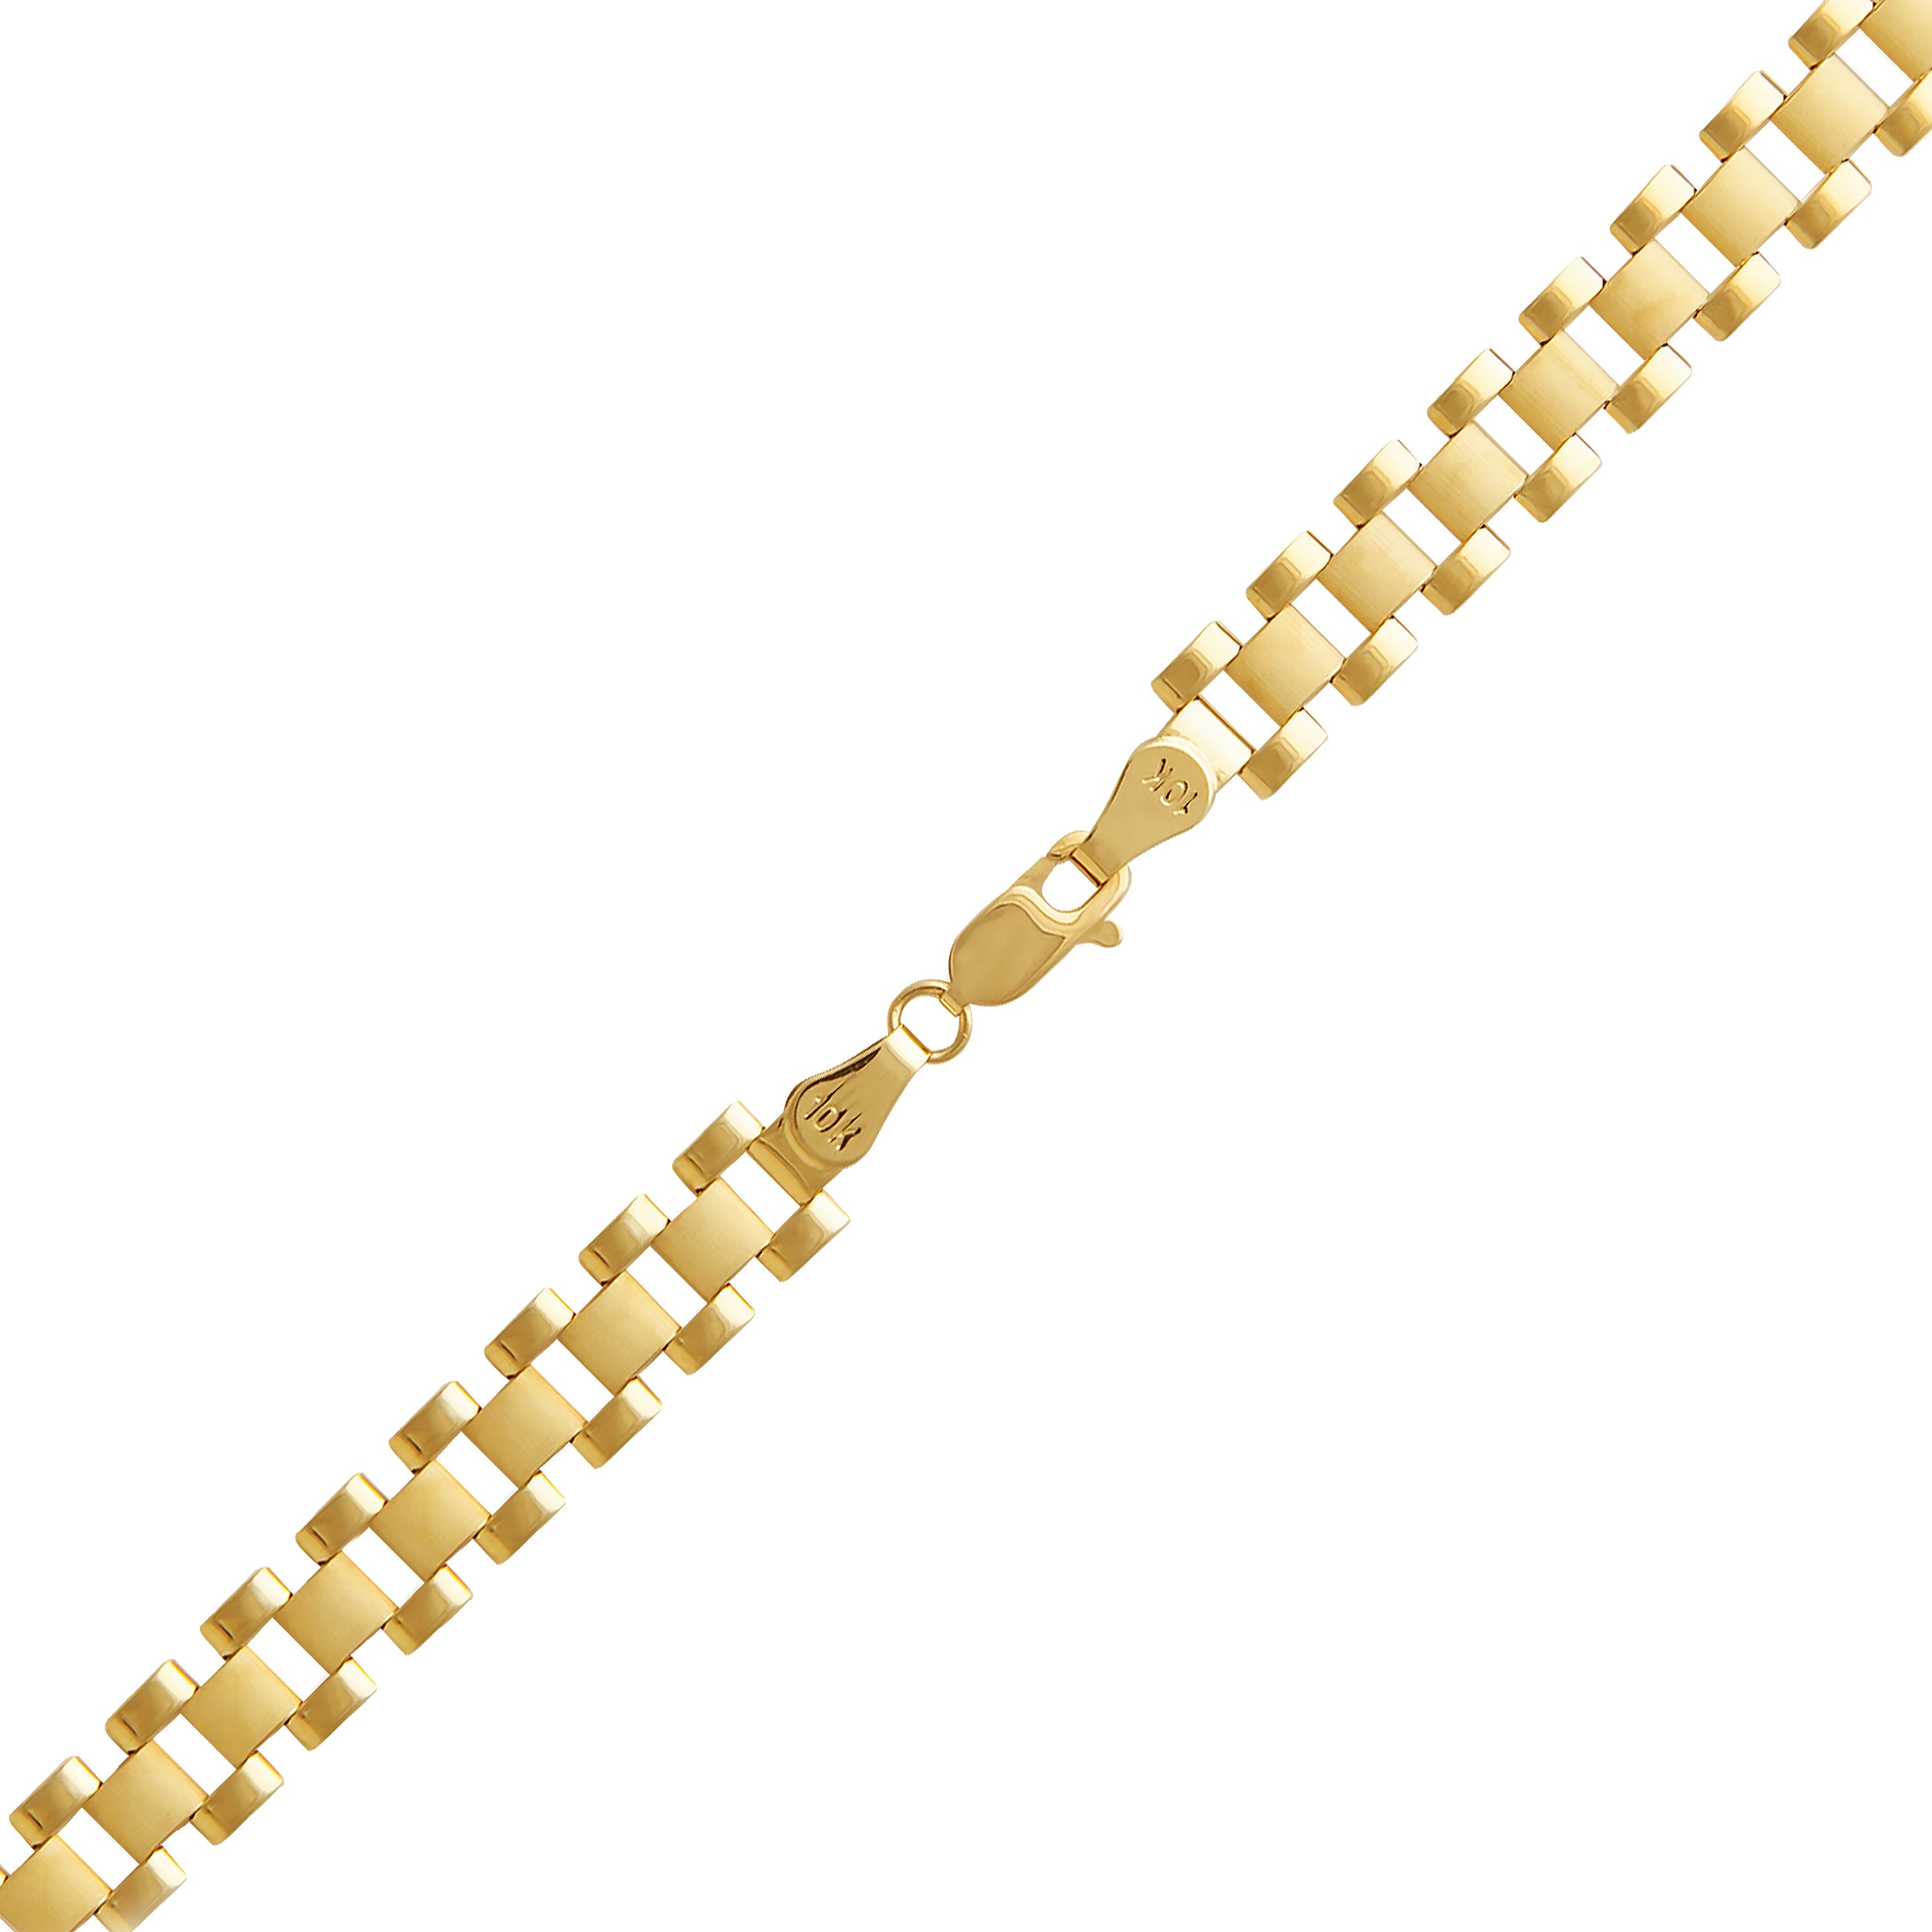 10K Solid Yellow Gold Rolex Bracelet 8.5mm 7-8 - Chain Link